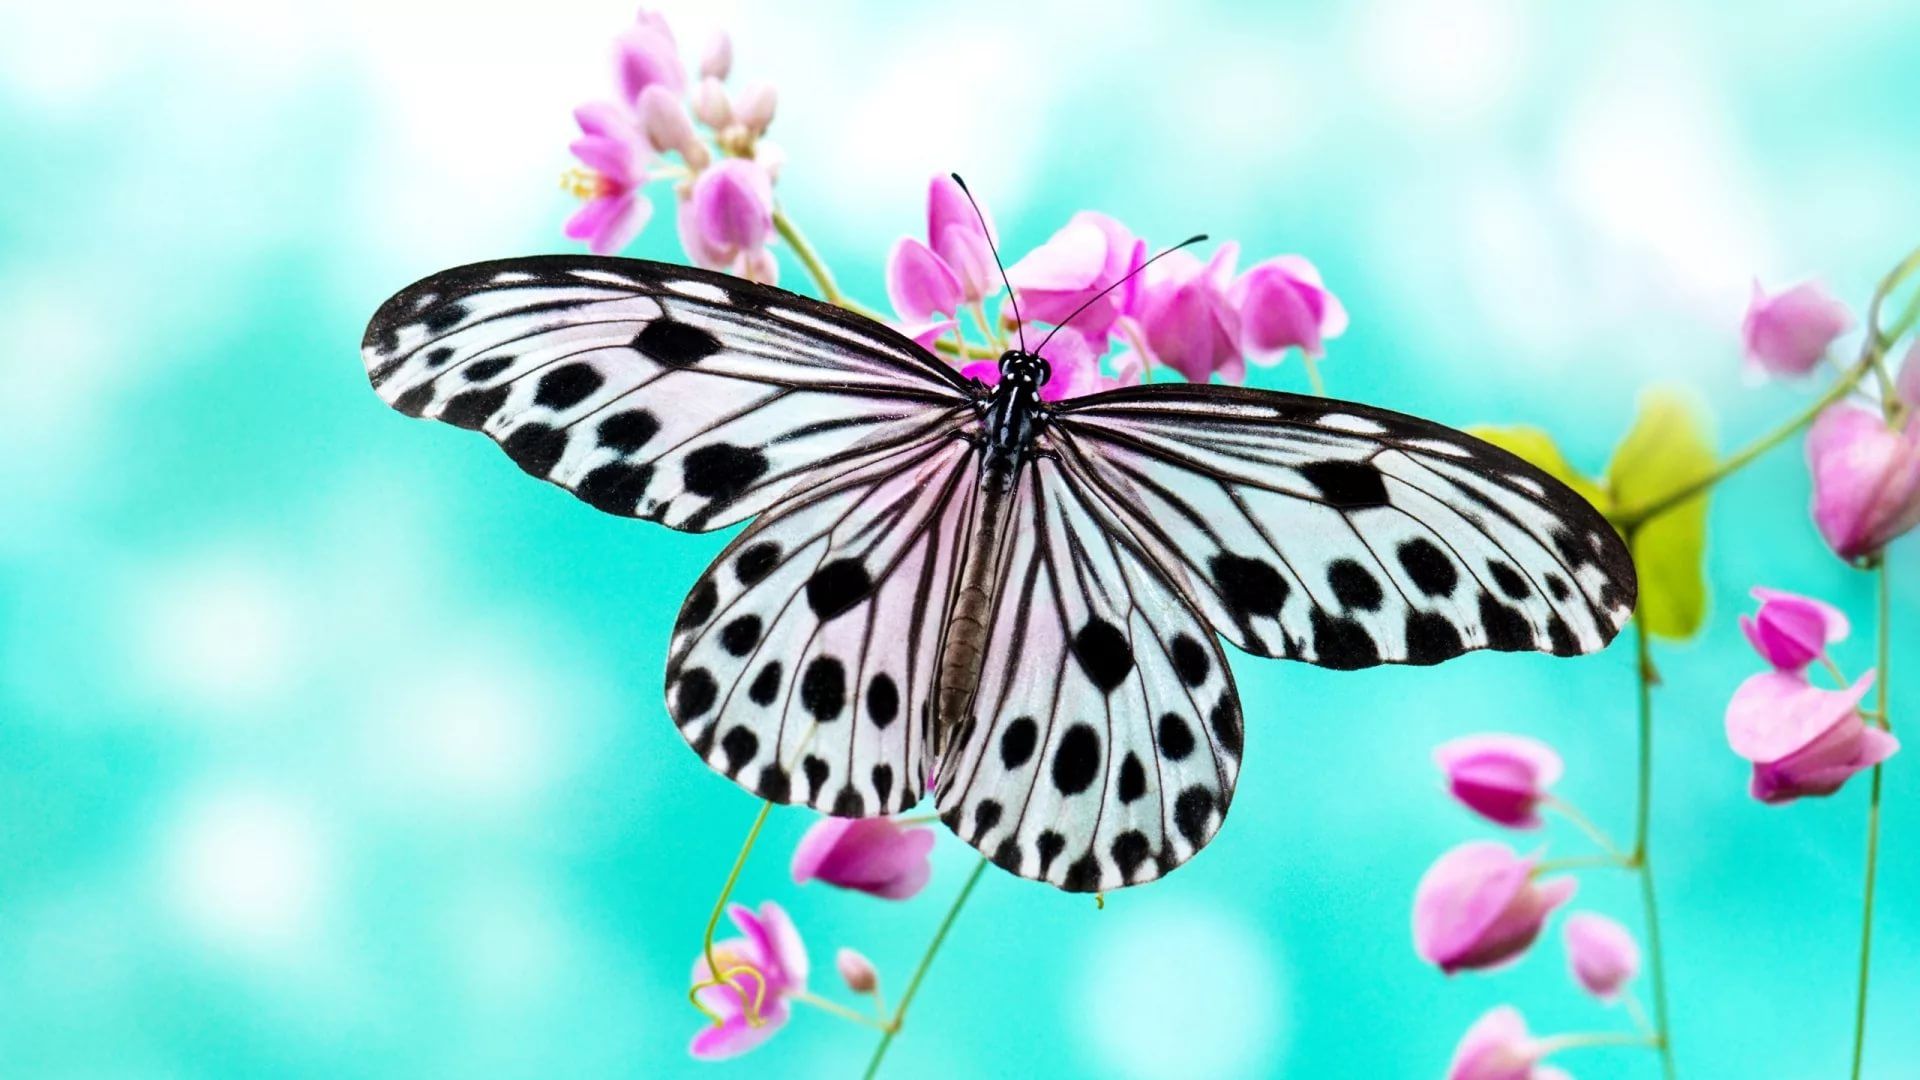 Nice Butterfly Image